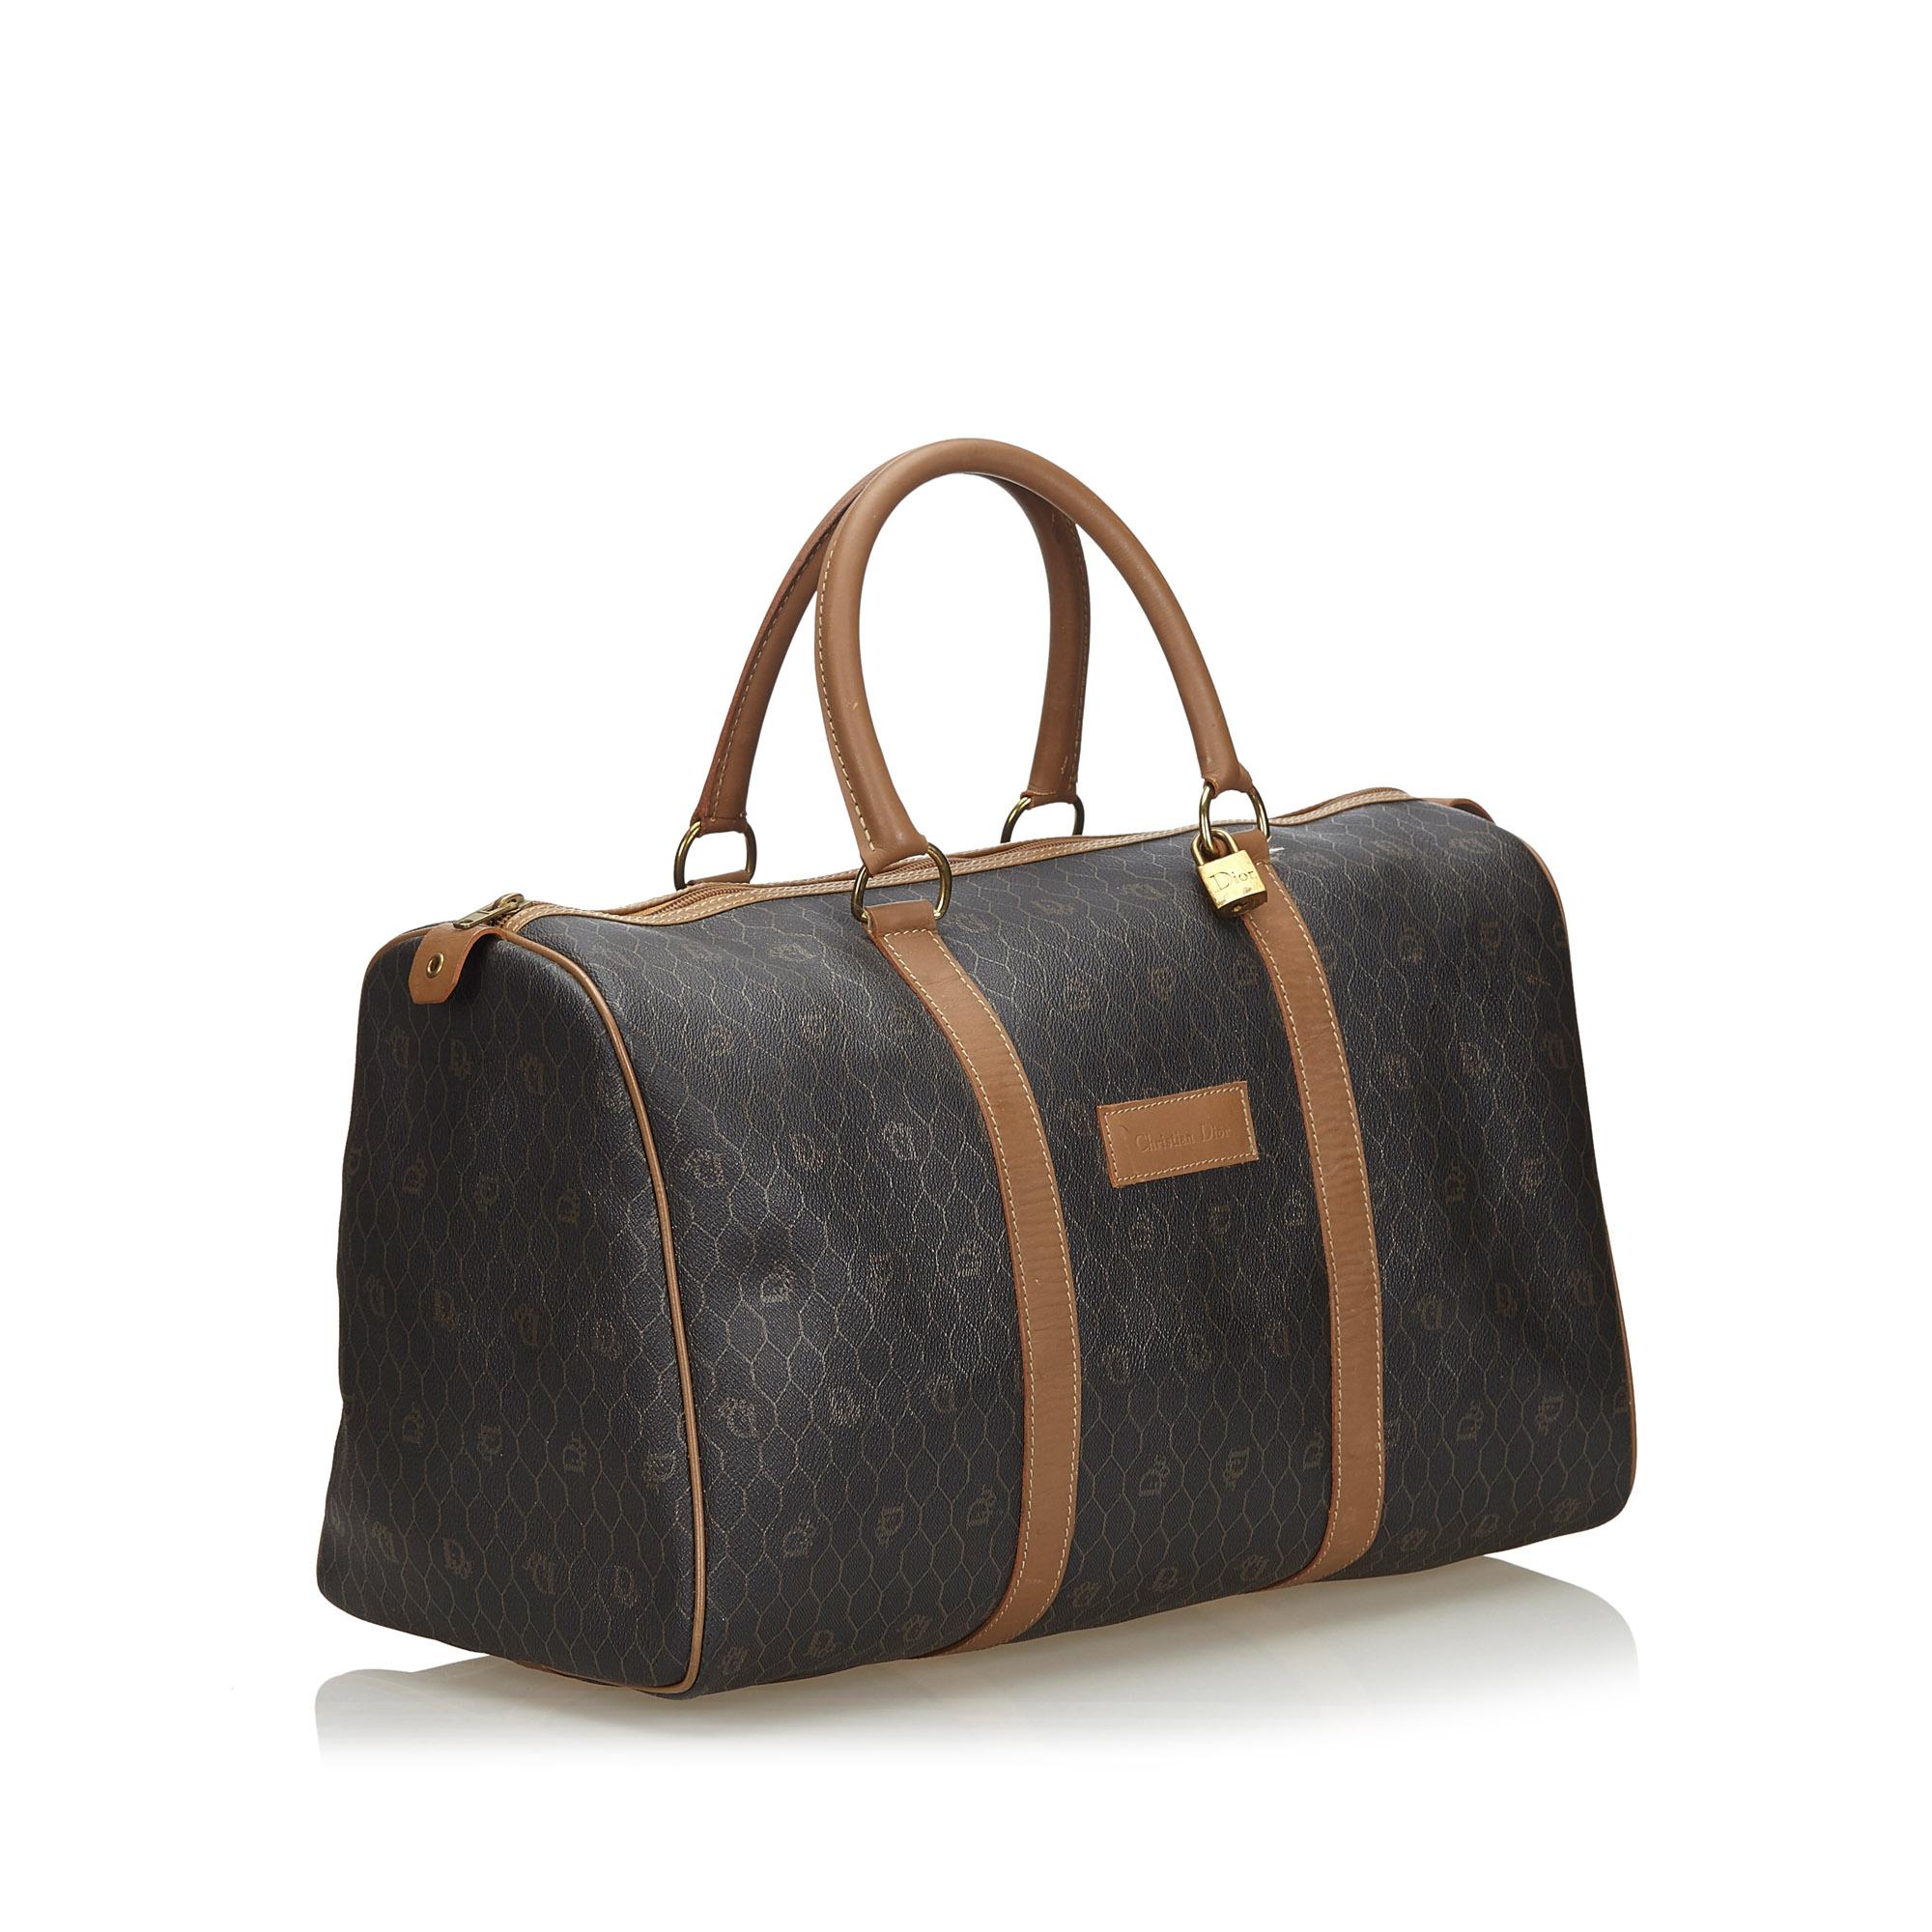 This duffle bag features a coated canvas body, rolled leather handles, and a top zip closure. It carries as B+ condition rating.

Inclusions: 
Padlock

Dimensions:
Length: 27.00 cm
Width: 44.00 cm
Depth: 22.00 cm
Shoulder Drop: 11.00 cm

Material: